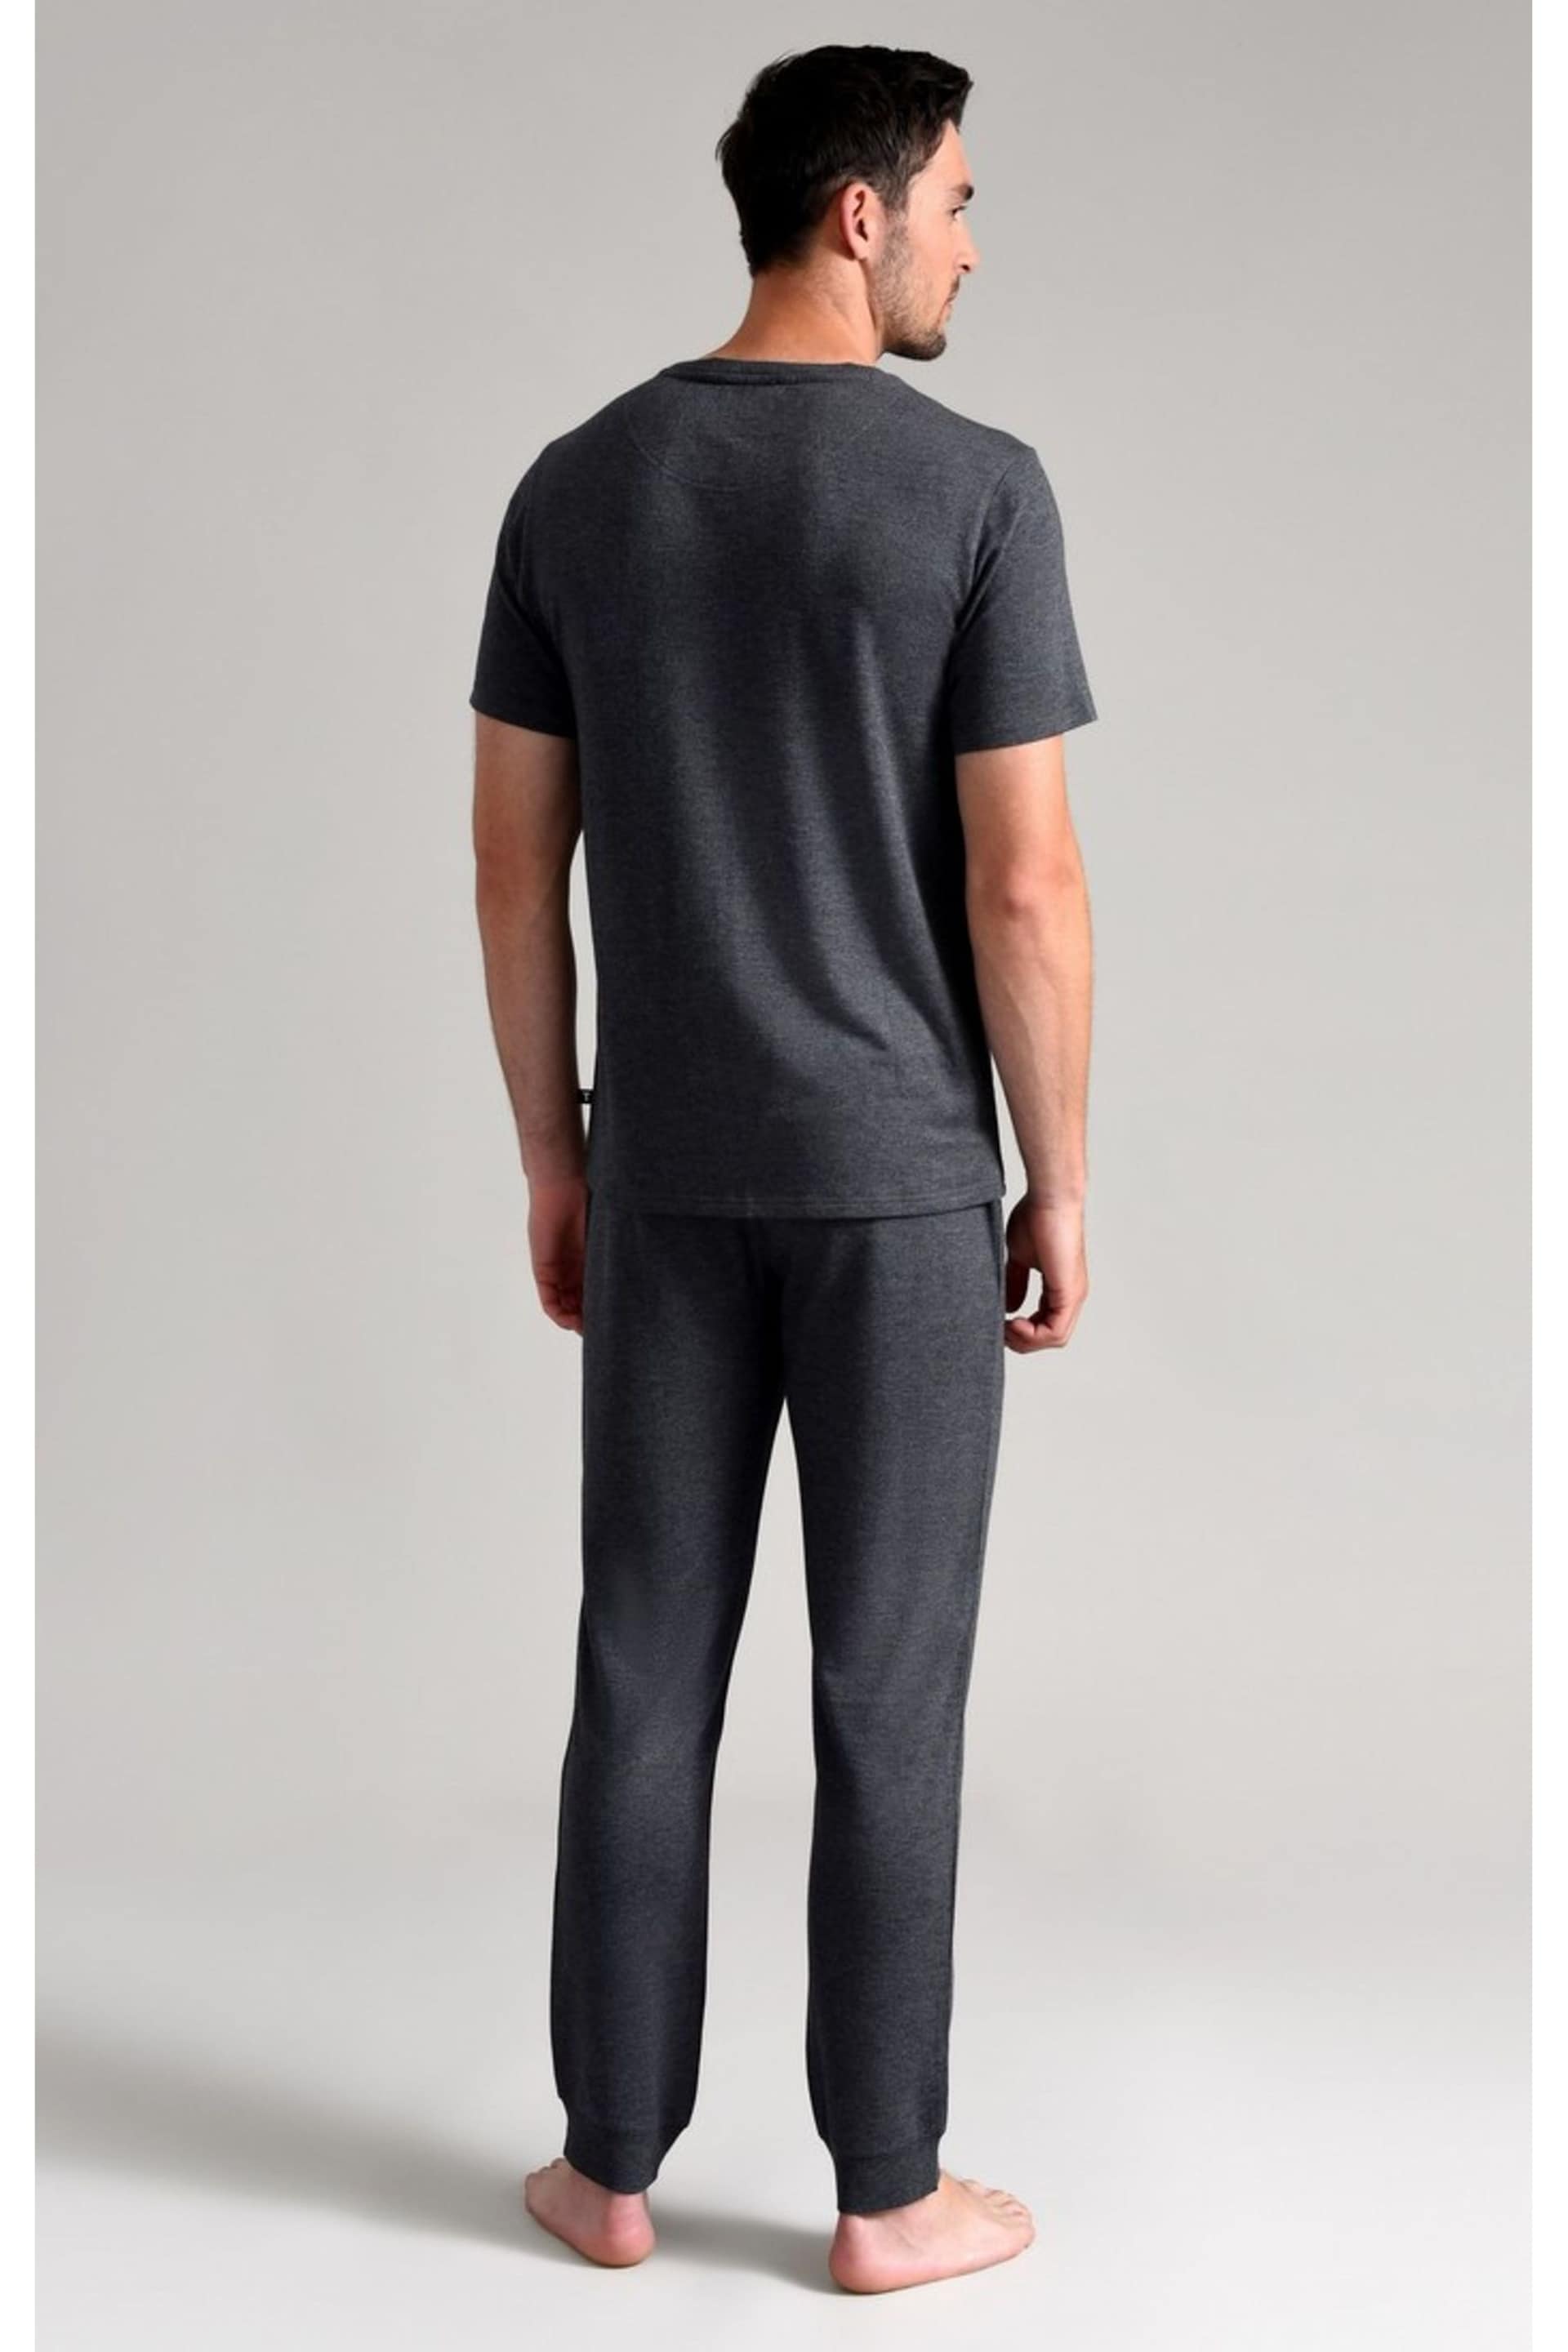 Ted Baker Grey T-Shirt - Image 2 of 3